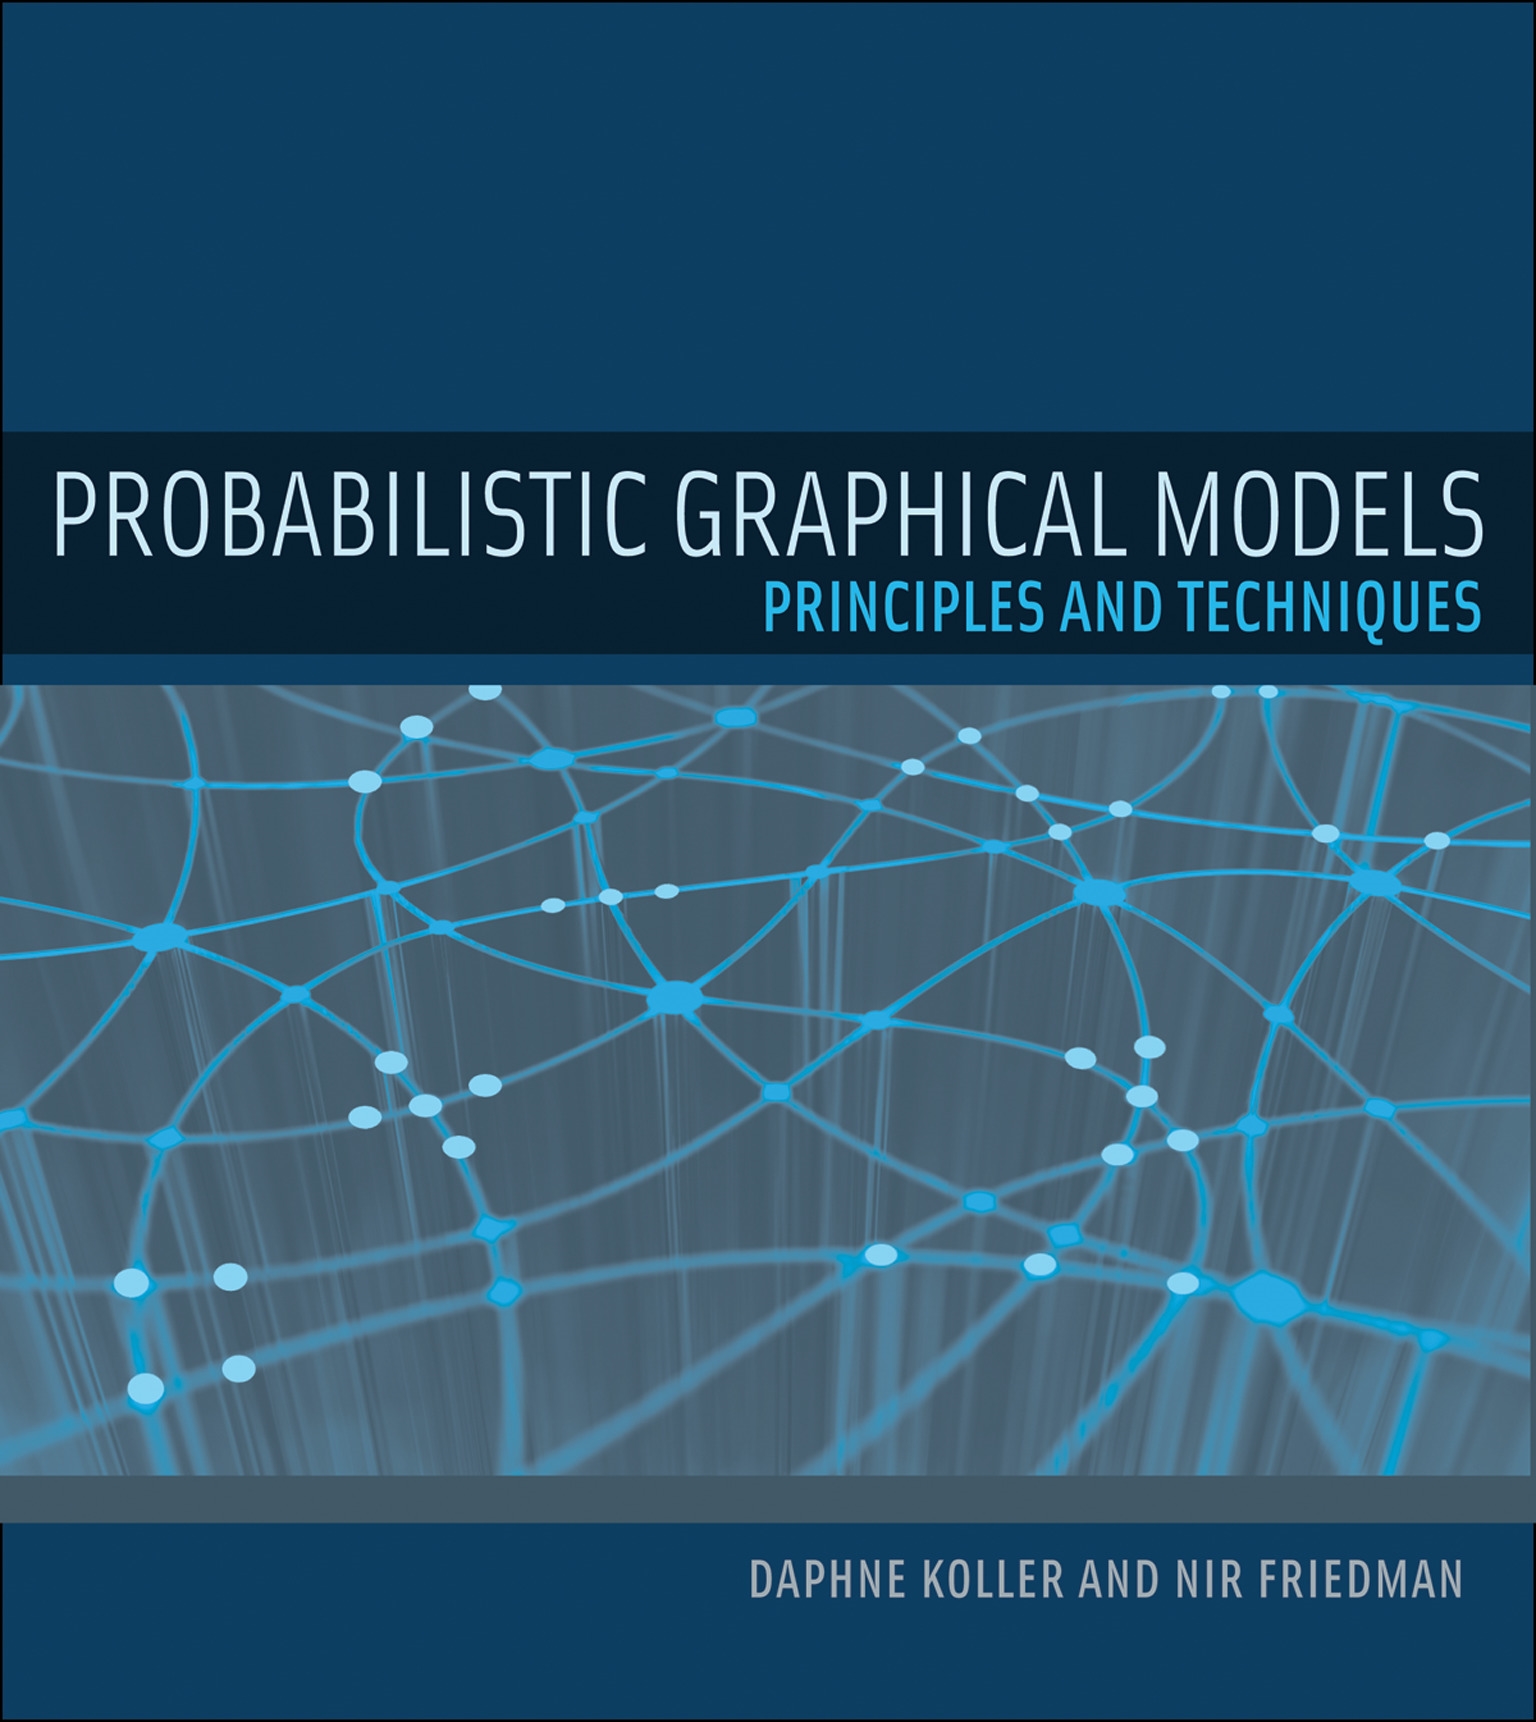 Graphic model. Probabilistic graphical models book. Probabilistic graph models. Technical and graphical Analysis. Probabilistic Framework.